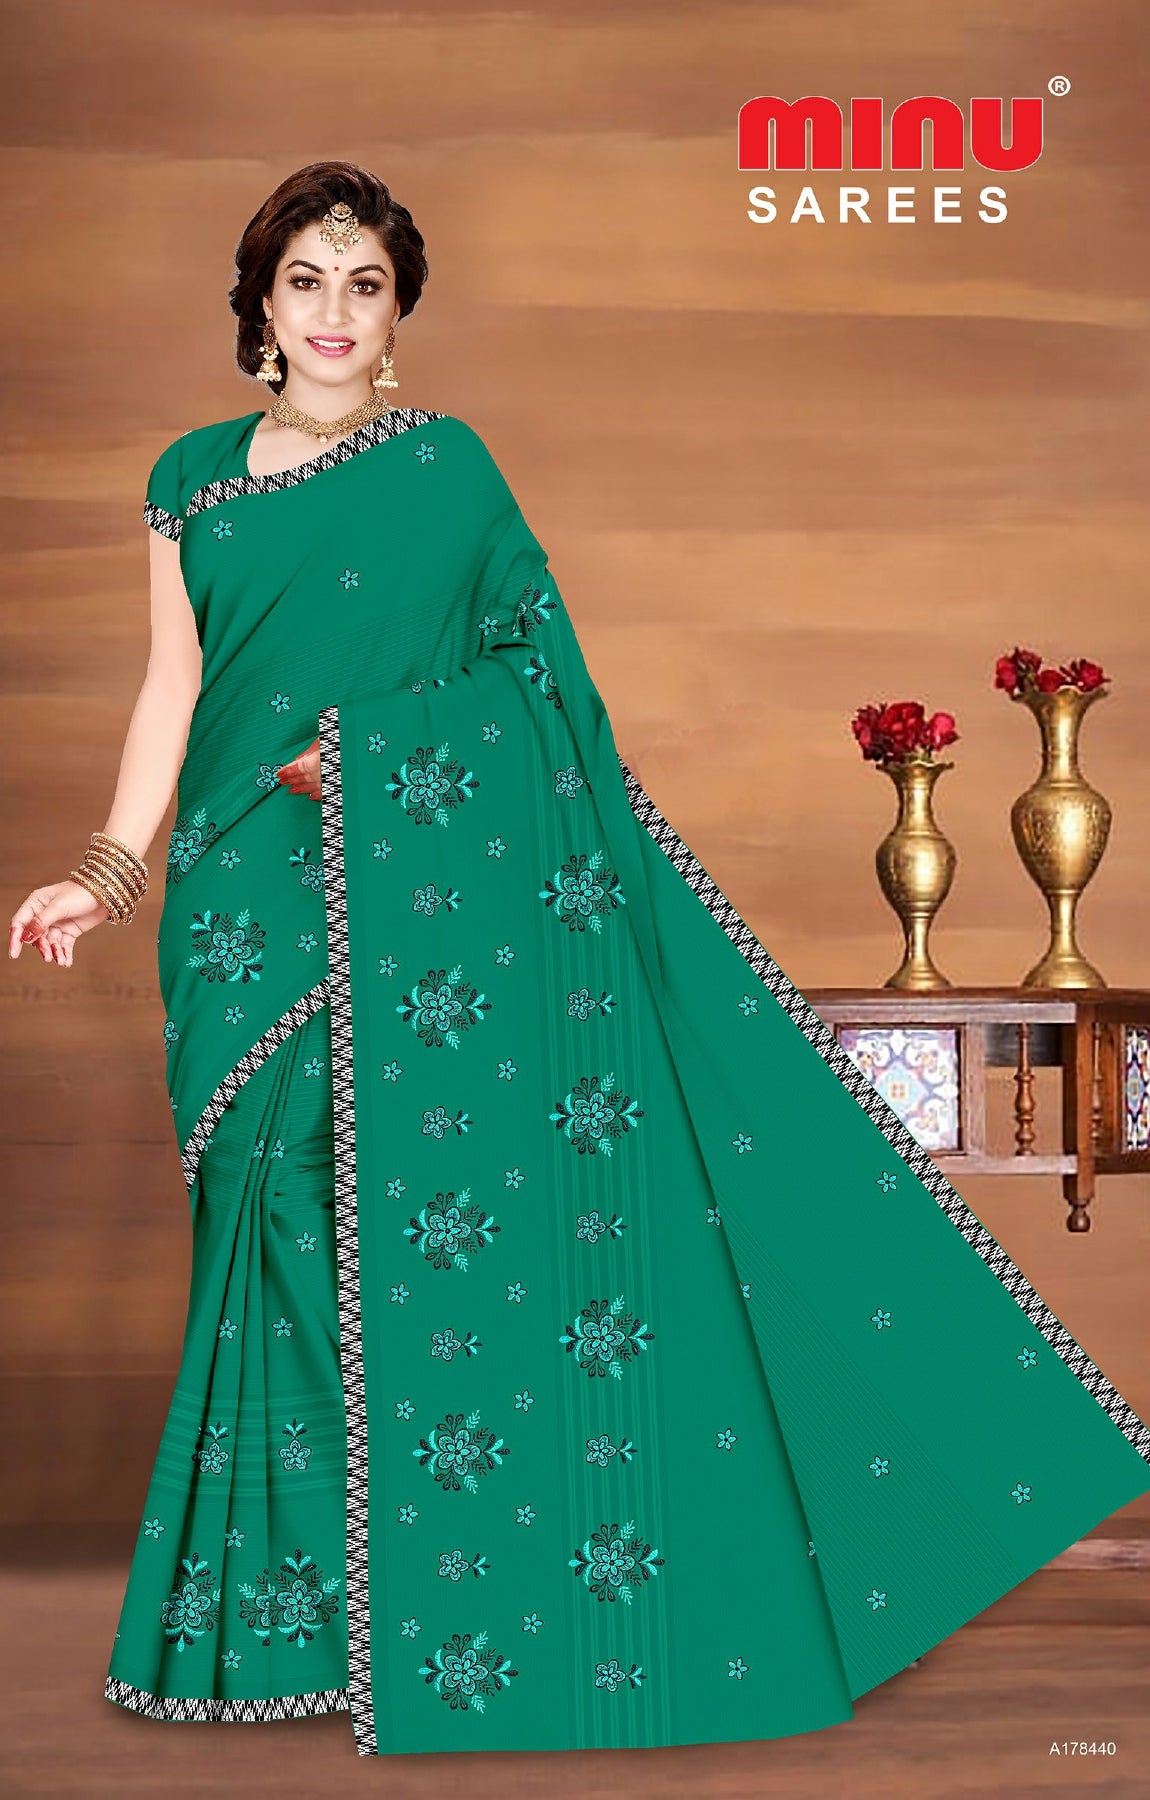 embroidered saree for wholesale at low prices 